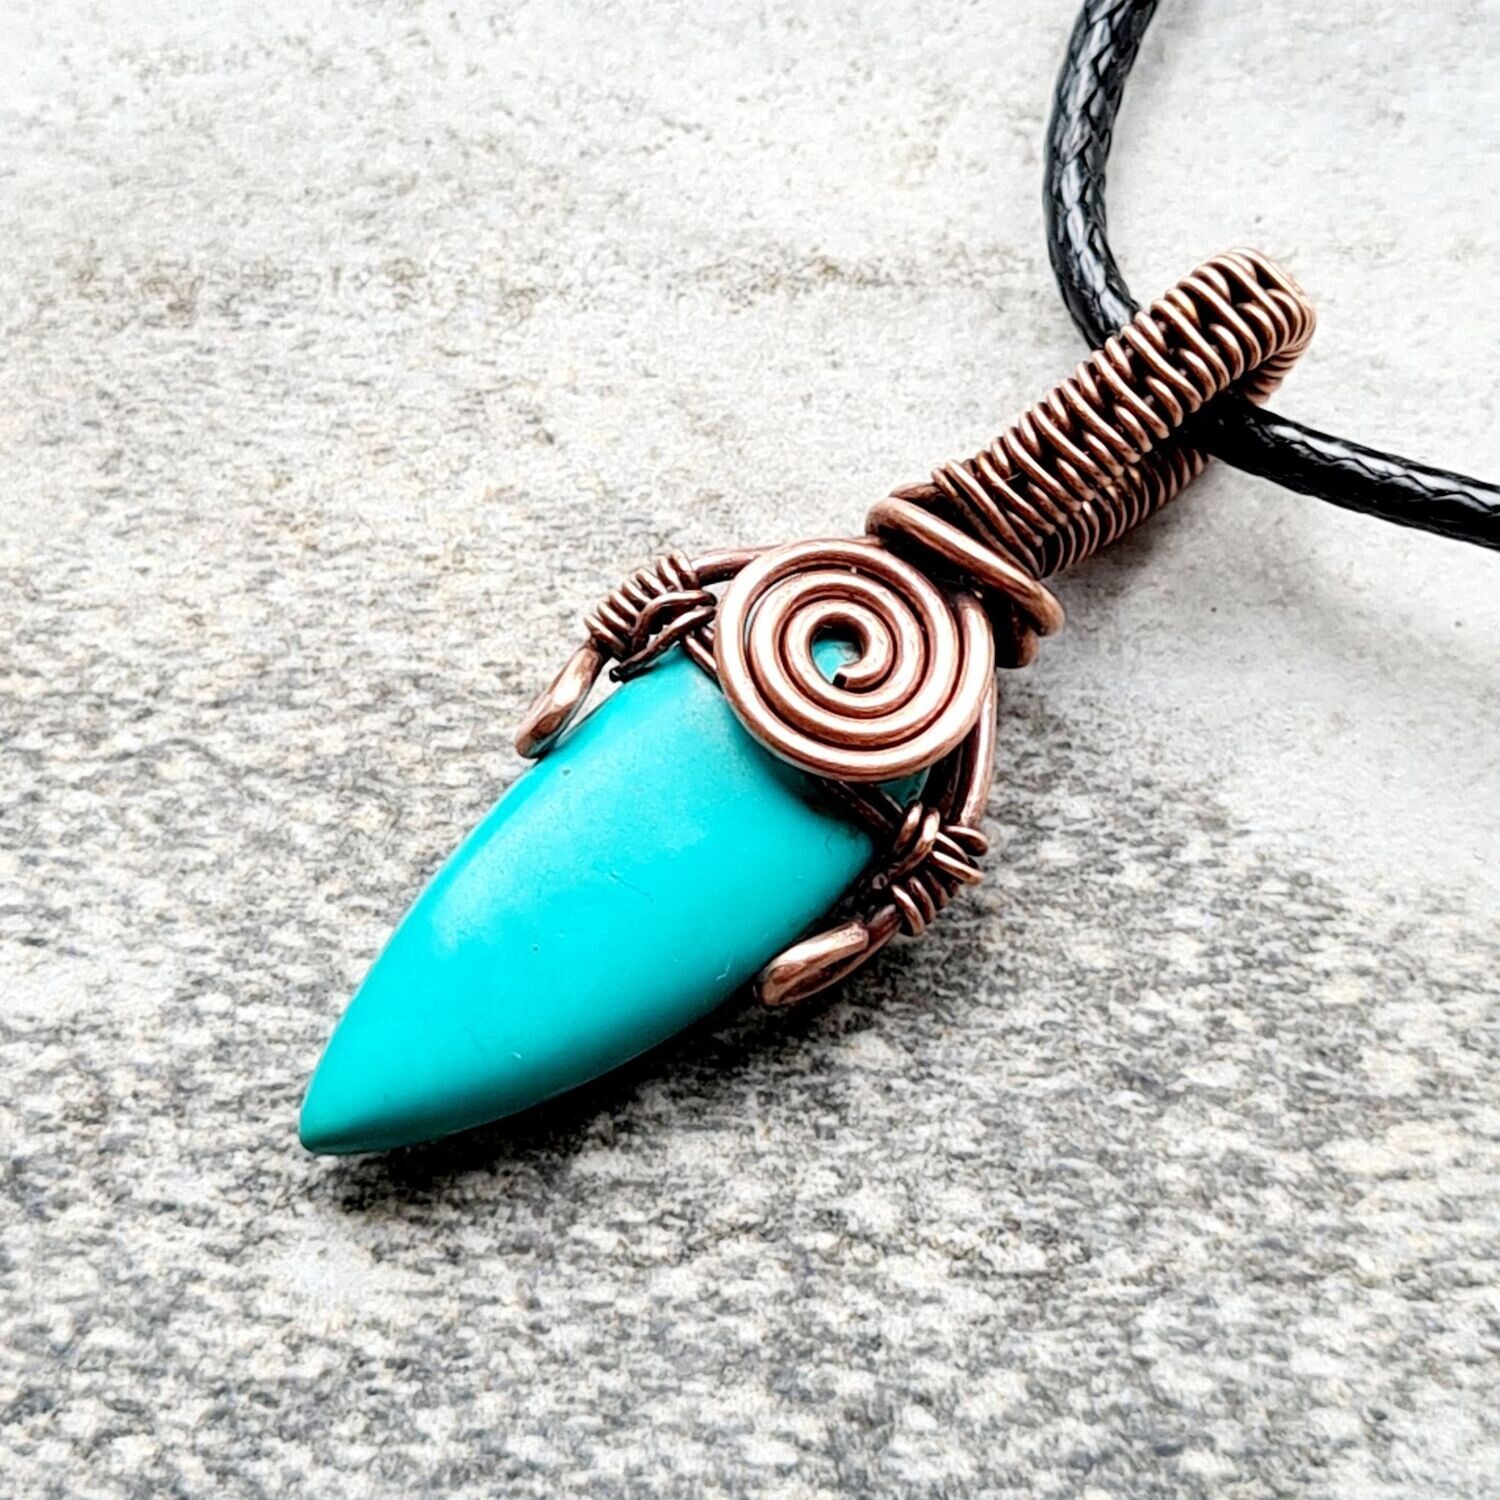 Turquoise pendant with chain.